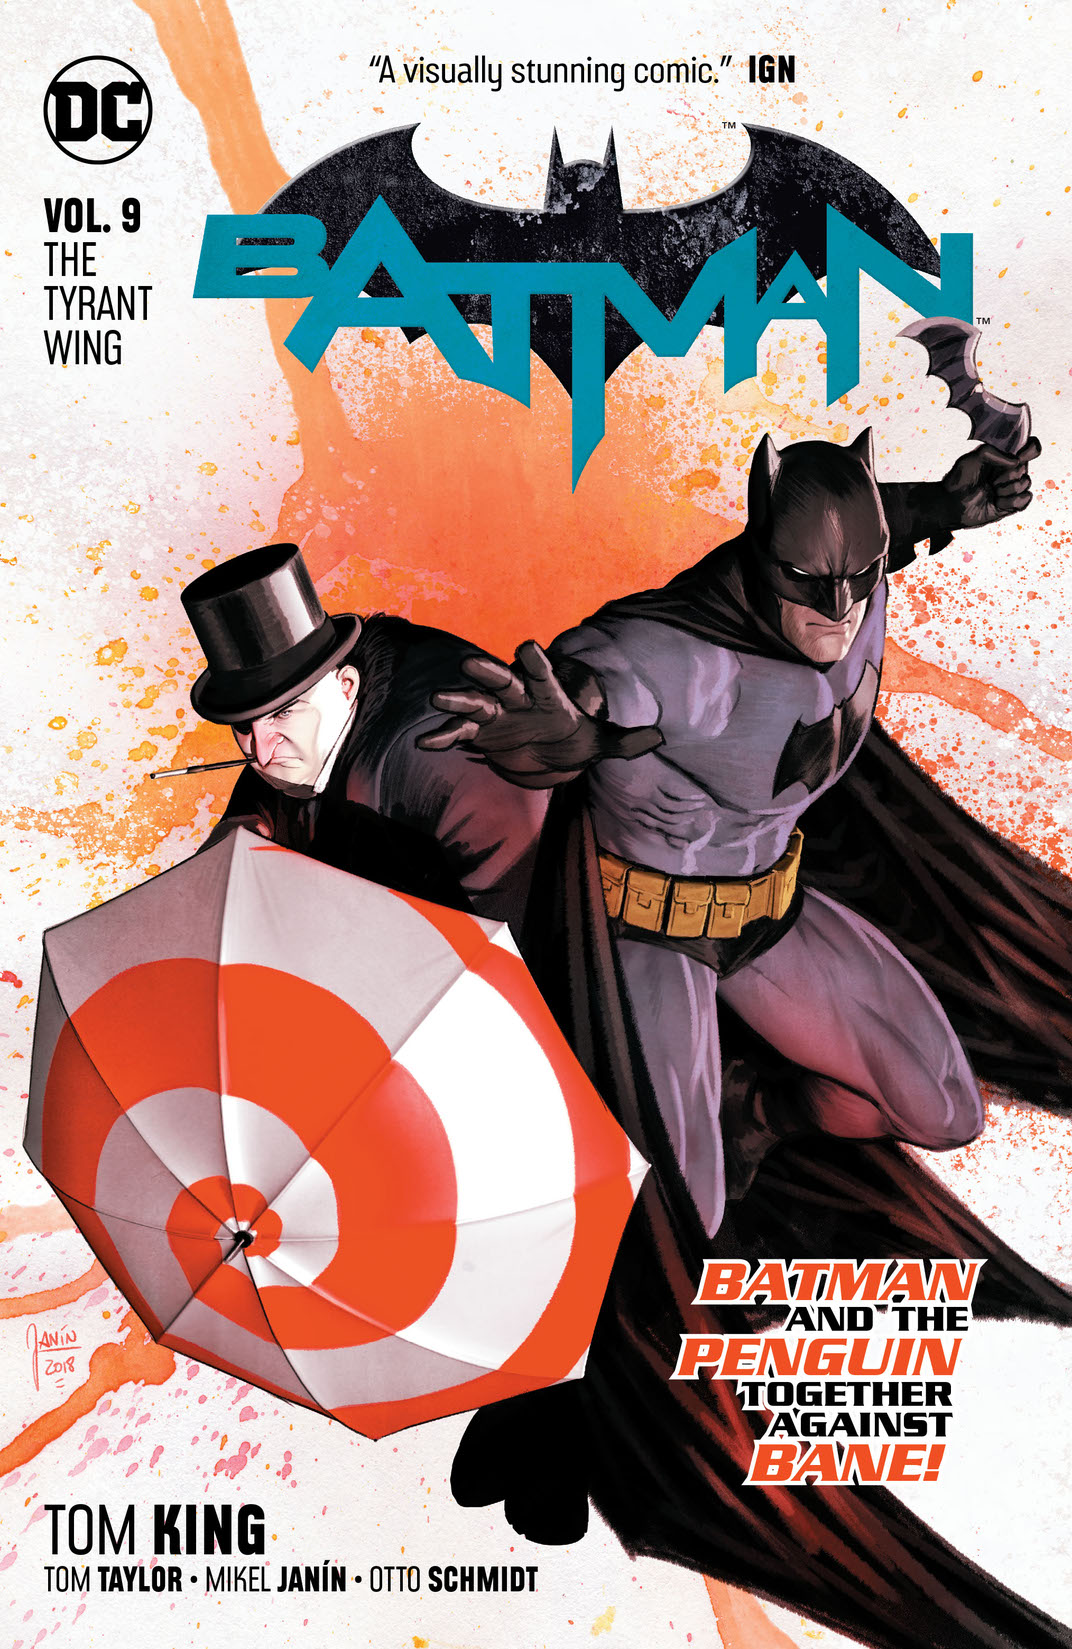 Batman Vol. 9: The Tyrant Wing preview images